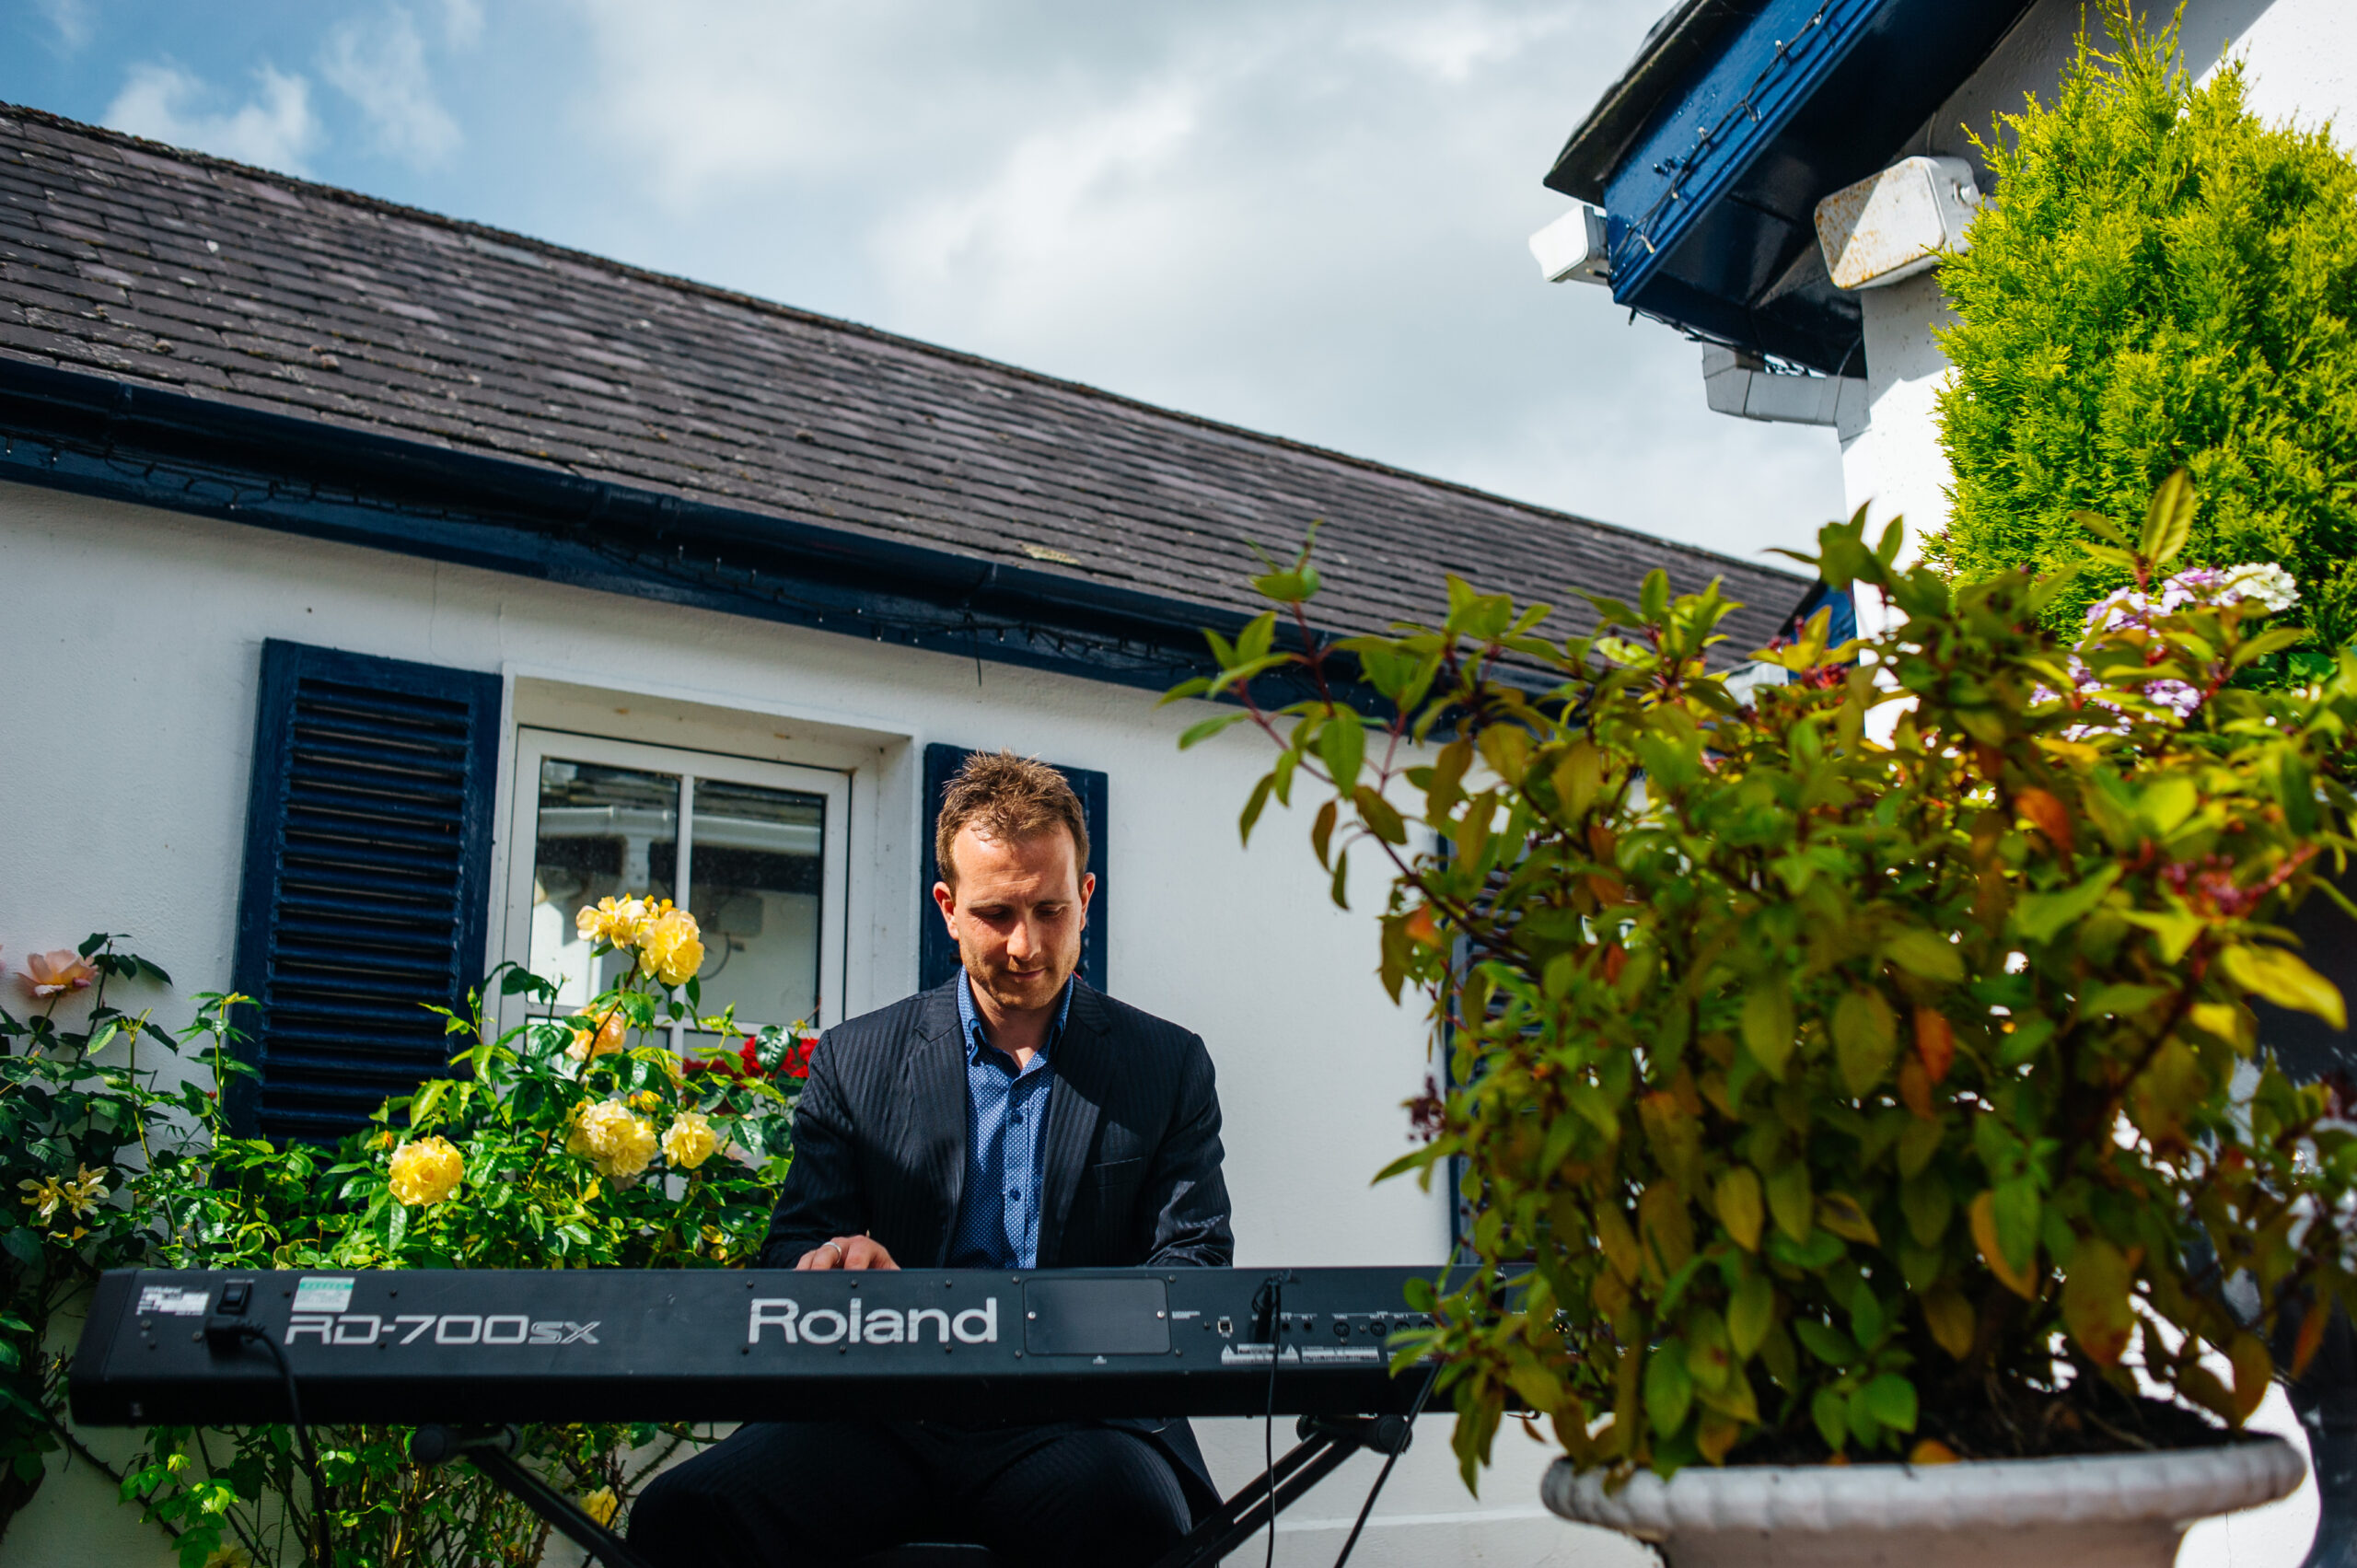 Joe Kenny playing piano outdoors at wedding drinks reception in The Stationhouse, Kilmessan, Co. Meath